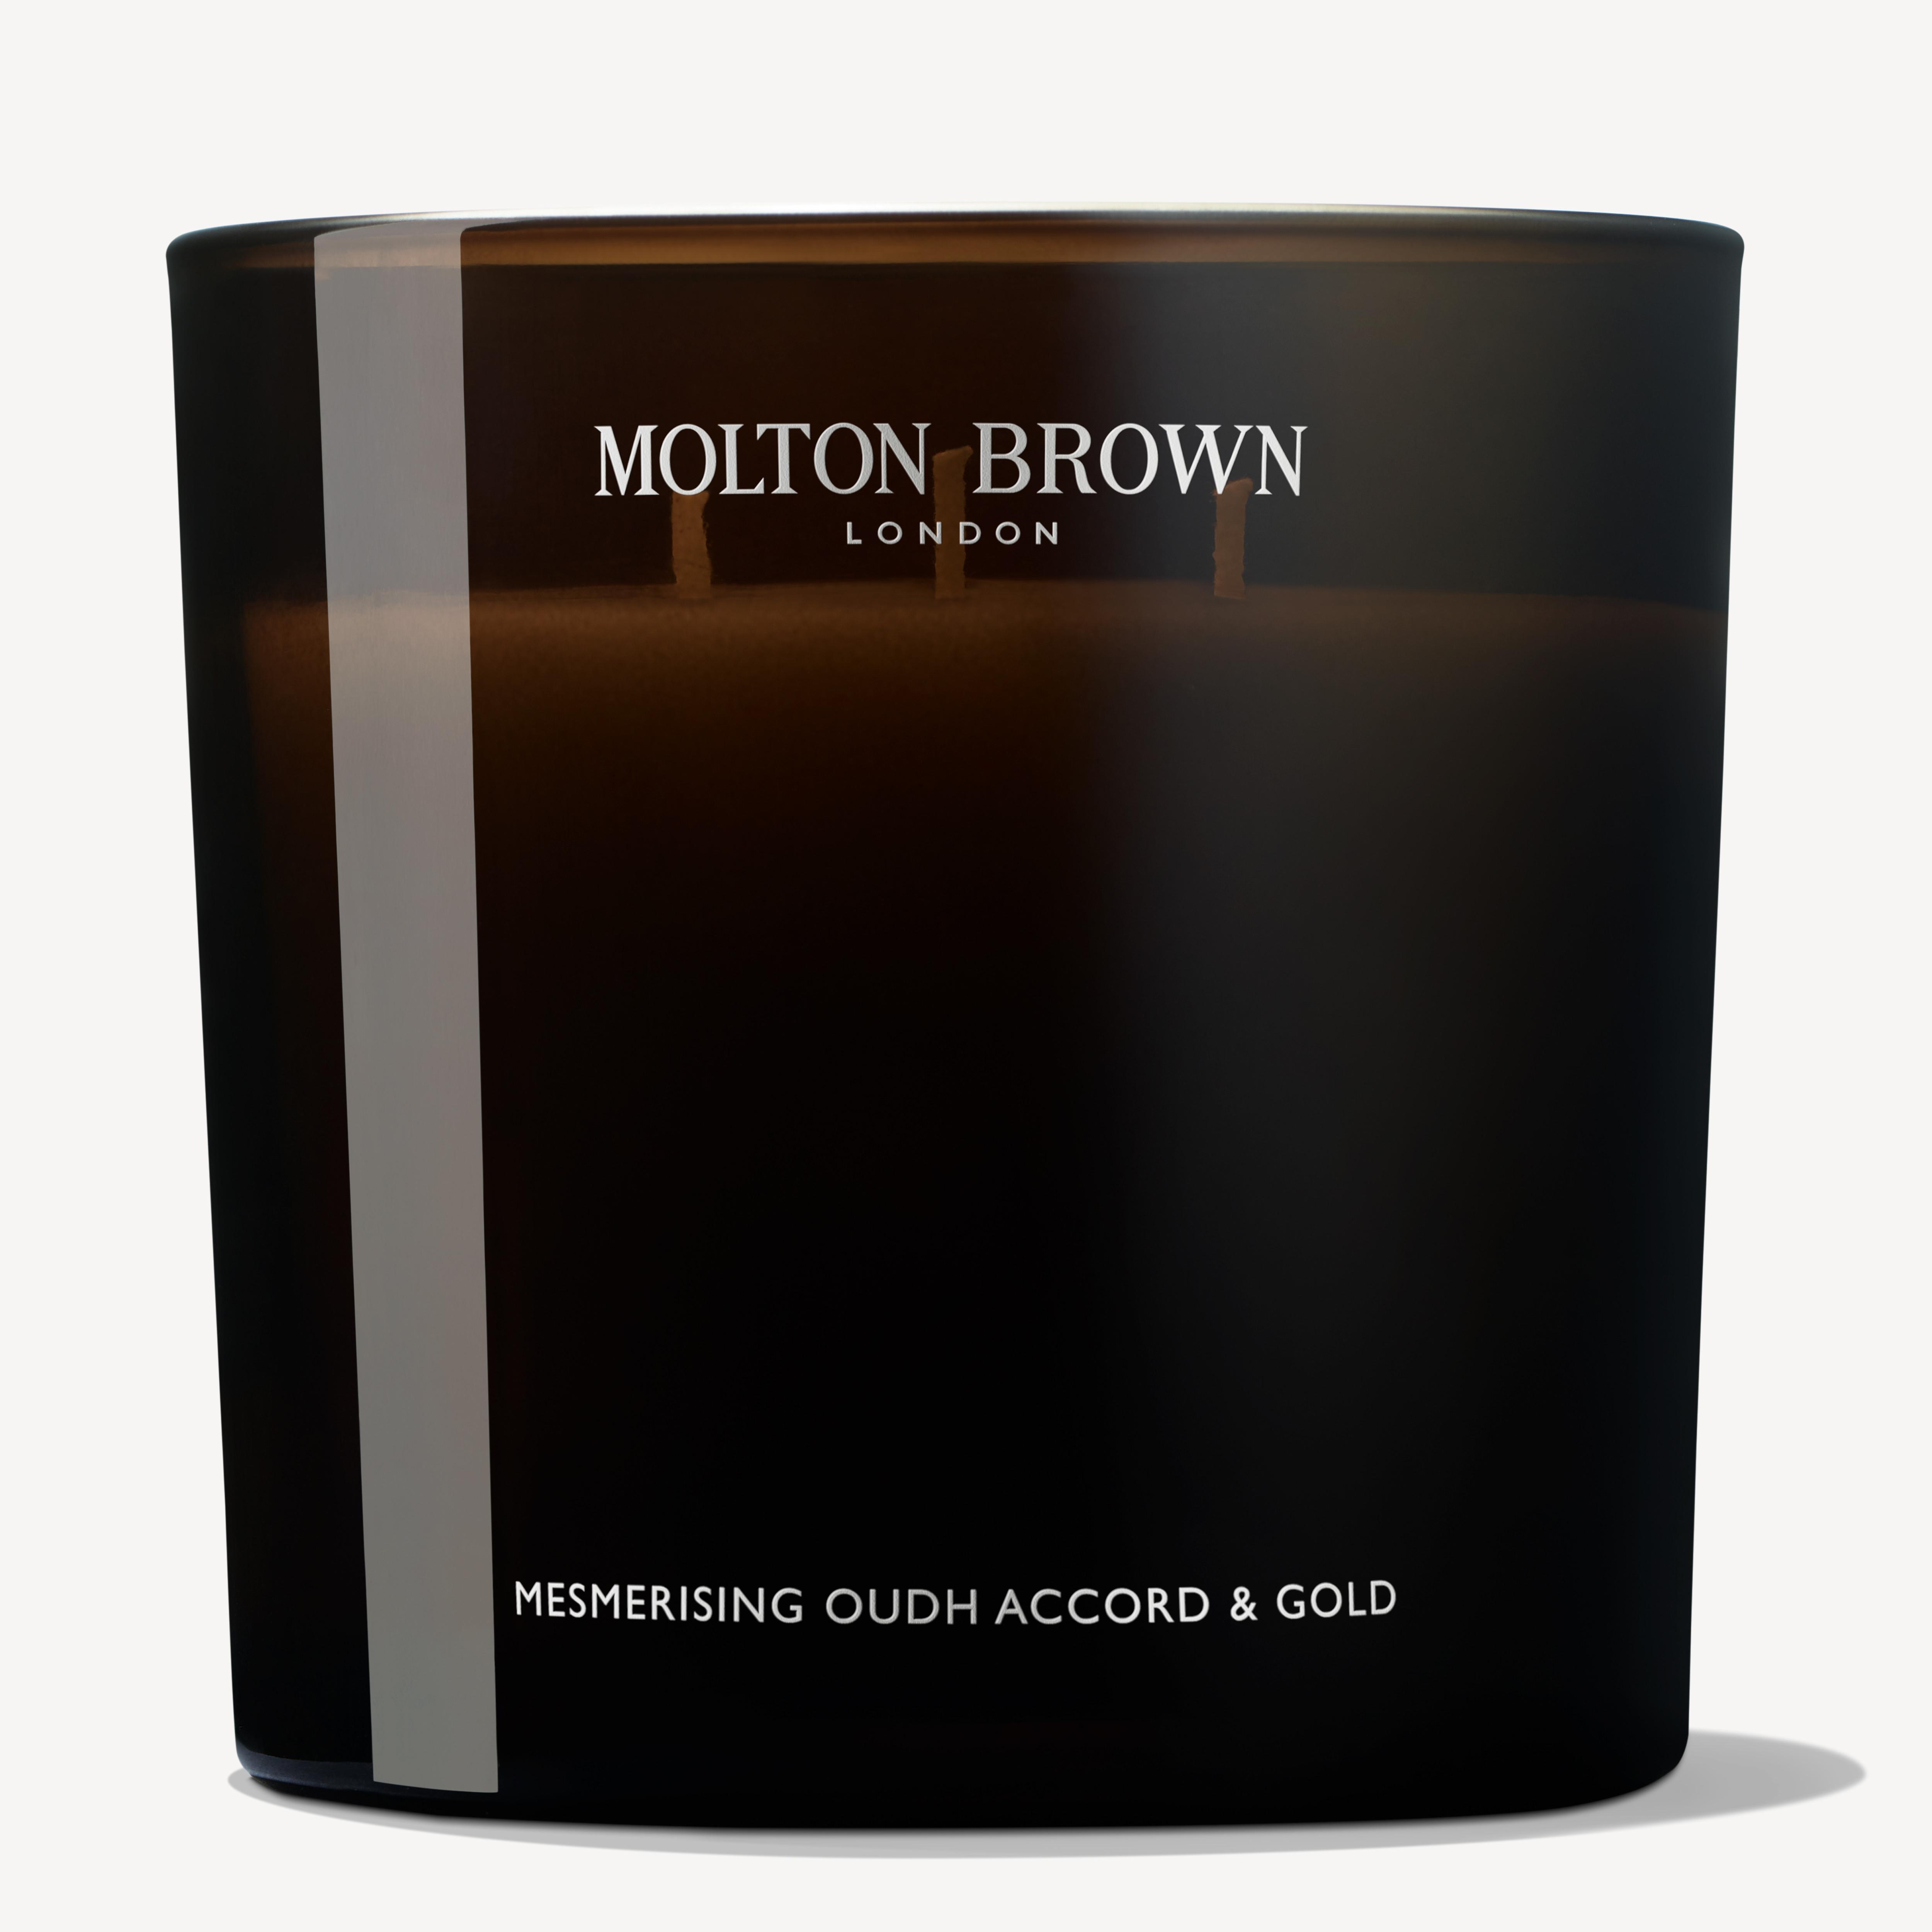 Molton Brown Mesmerising Oudh Accord & Gold Luxury Candle 600g